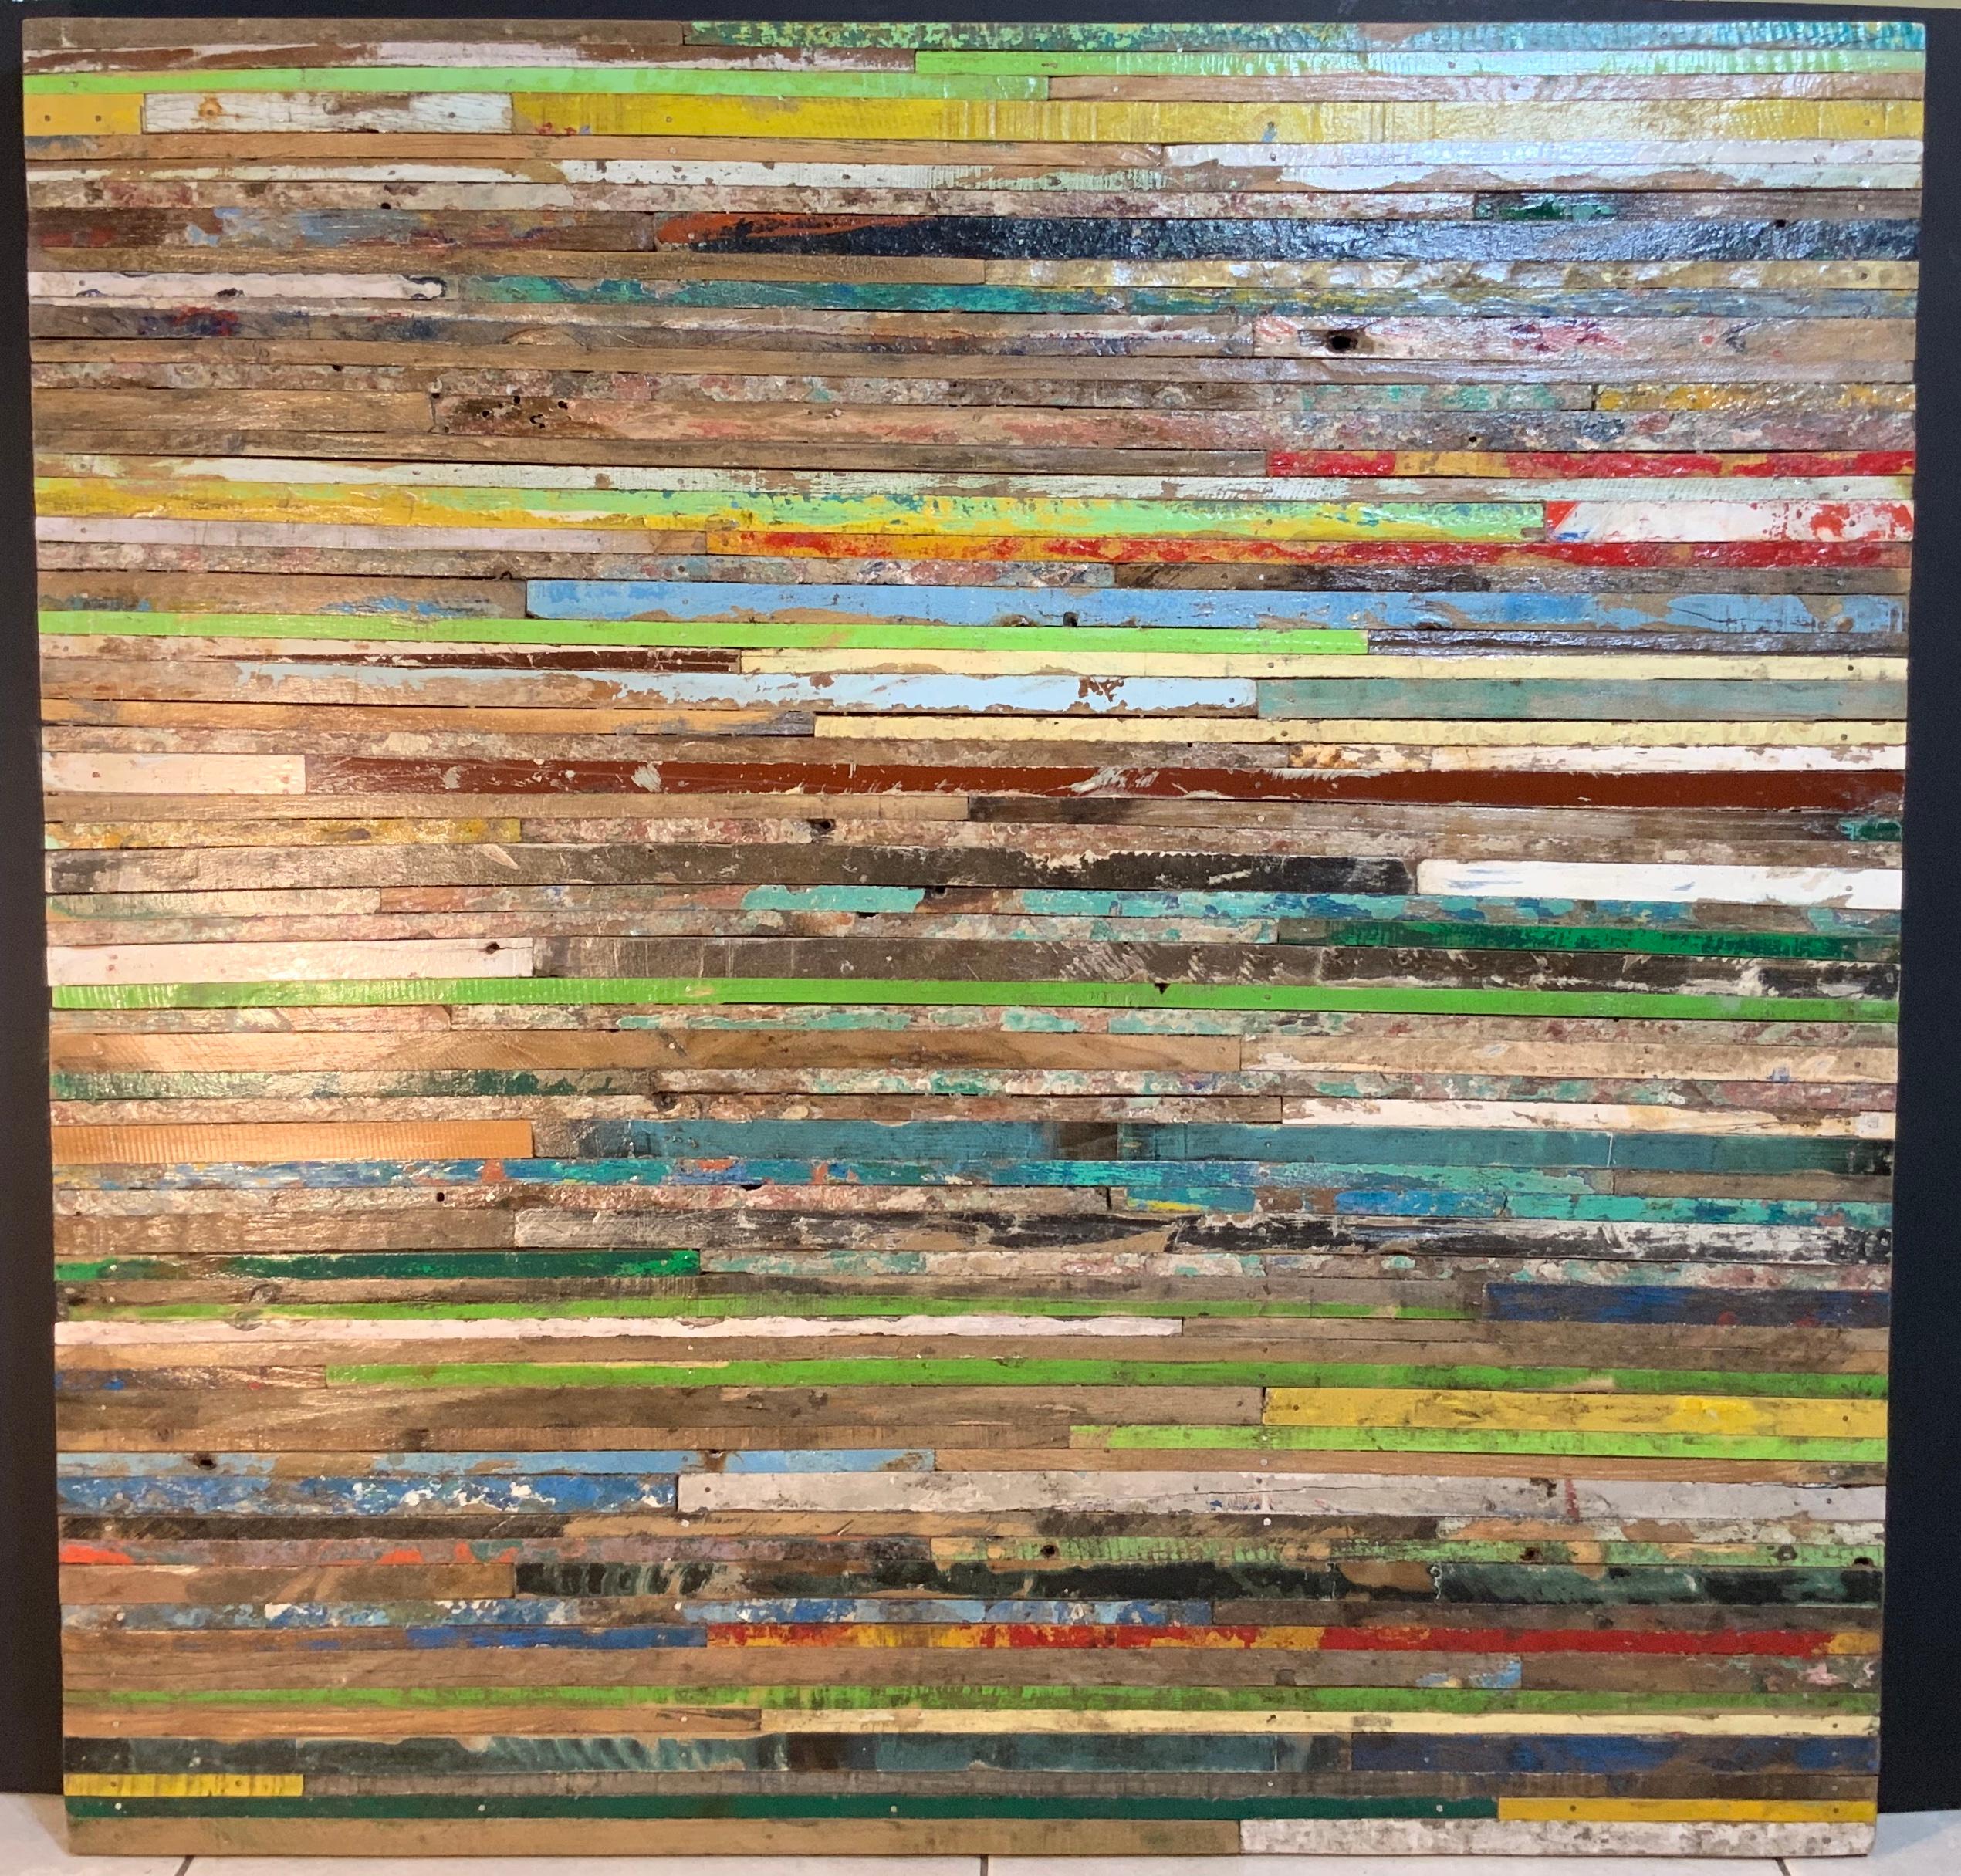 Exceptional wall hanging wood sculpture made of multi colors reclaimed wood strips cuts, to put together beautiful mosaic of colors
By this unknown artist.
Could use horizontal or vertical.